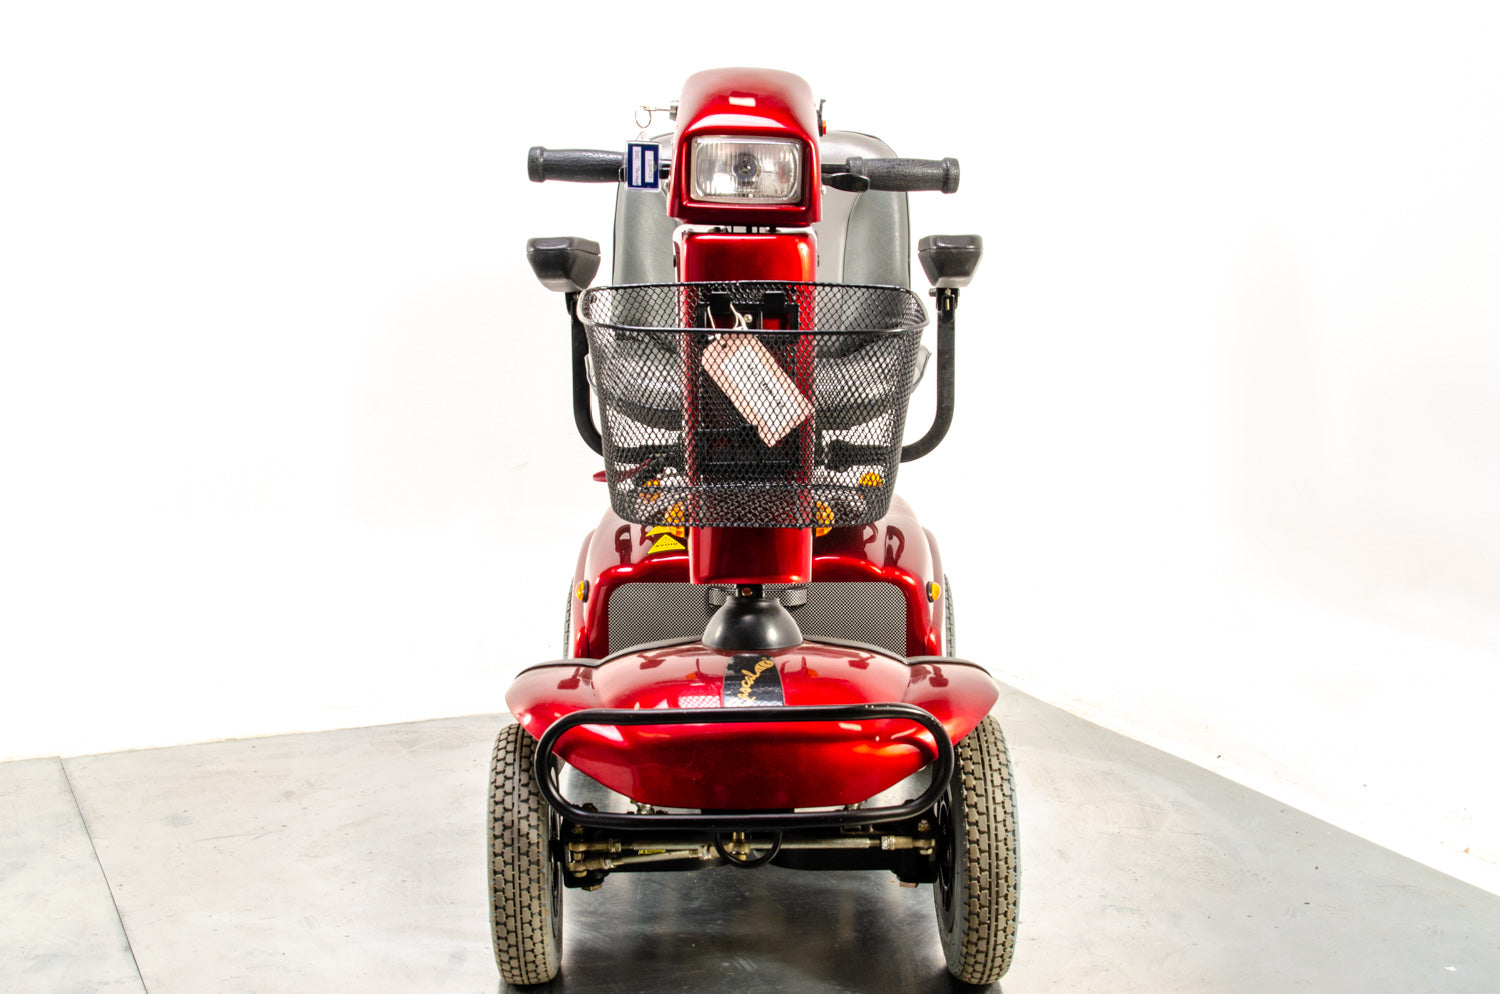 Rascal 388 All-Terrain Used Electric Mobility Scooter 6mph Road Pavement Suspension Red 03687